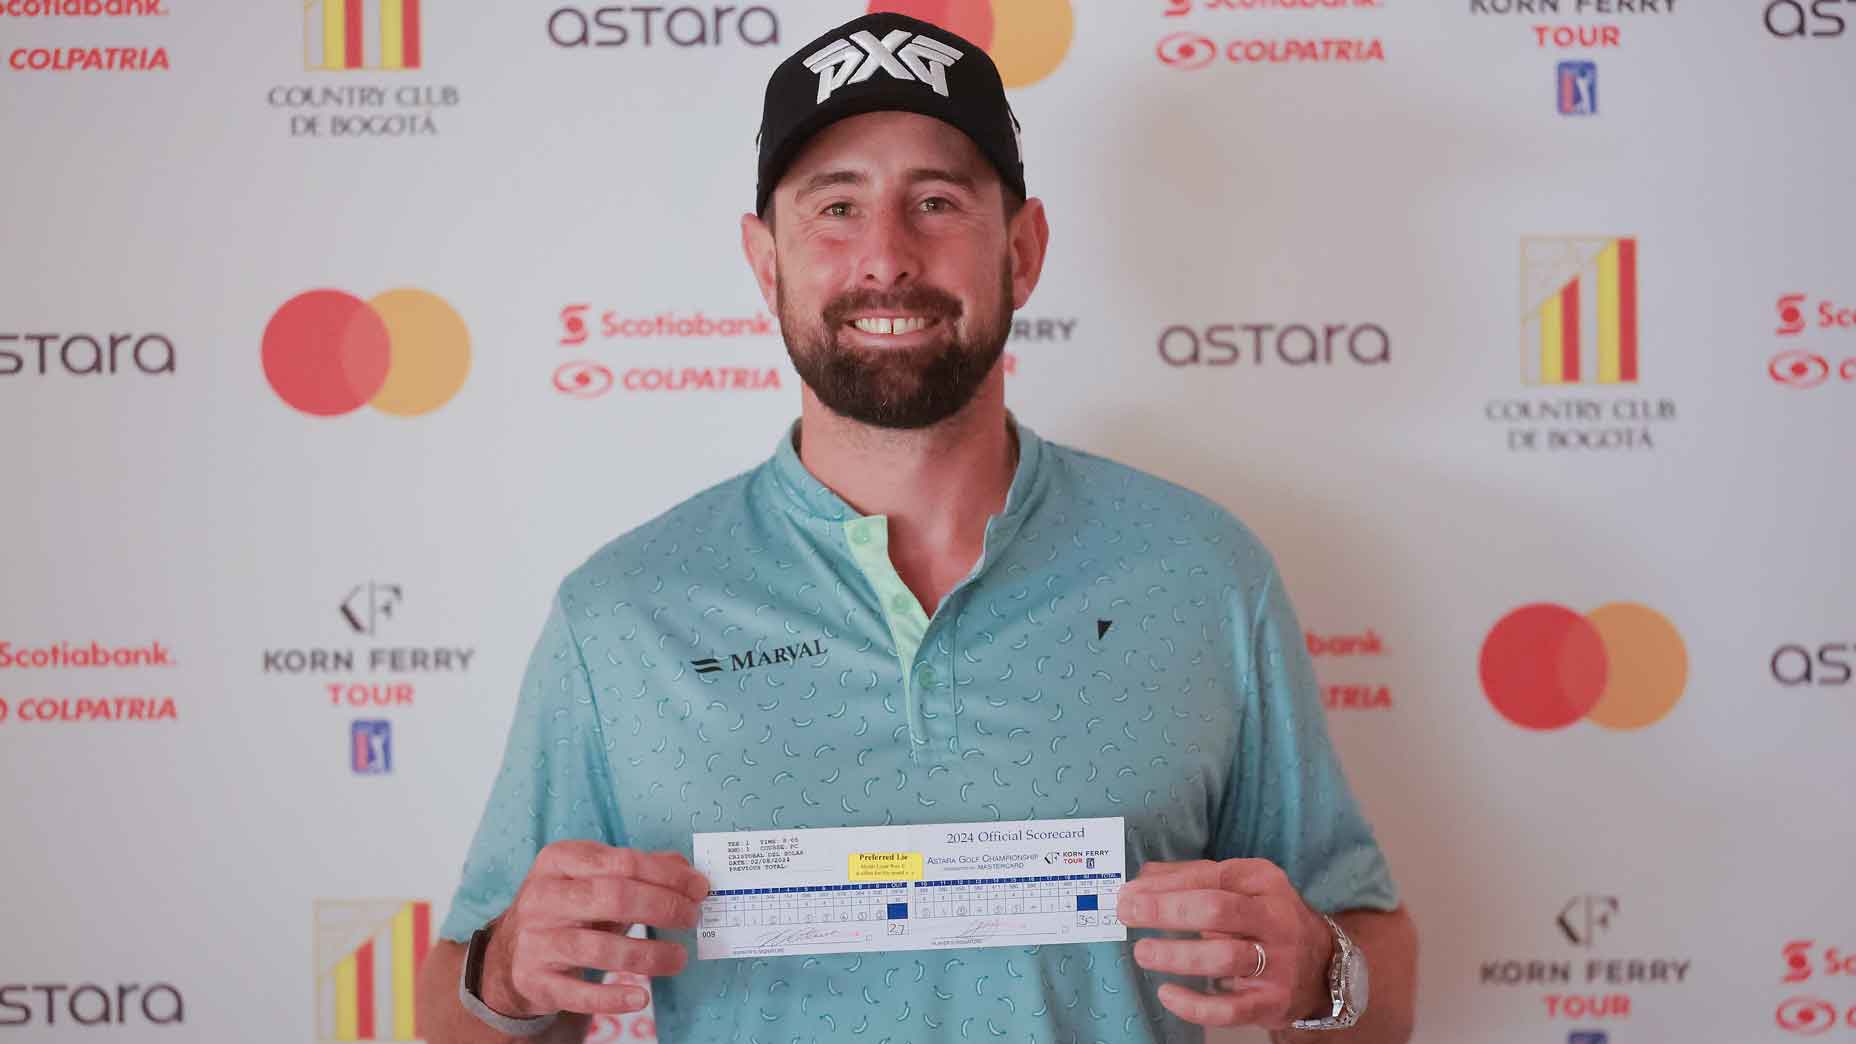 Cristobal Del Solar of Chile holds his official scorecard which features his score 57 during the first round of the Astara Golf Championship presented by Mastercard at Country Club de Bogota on February 08, 2024 in Bogota, Colombia.